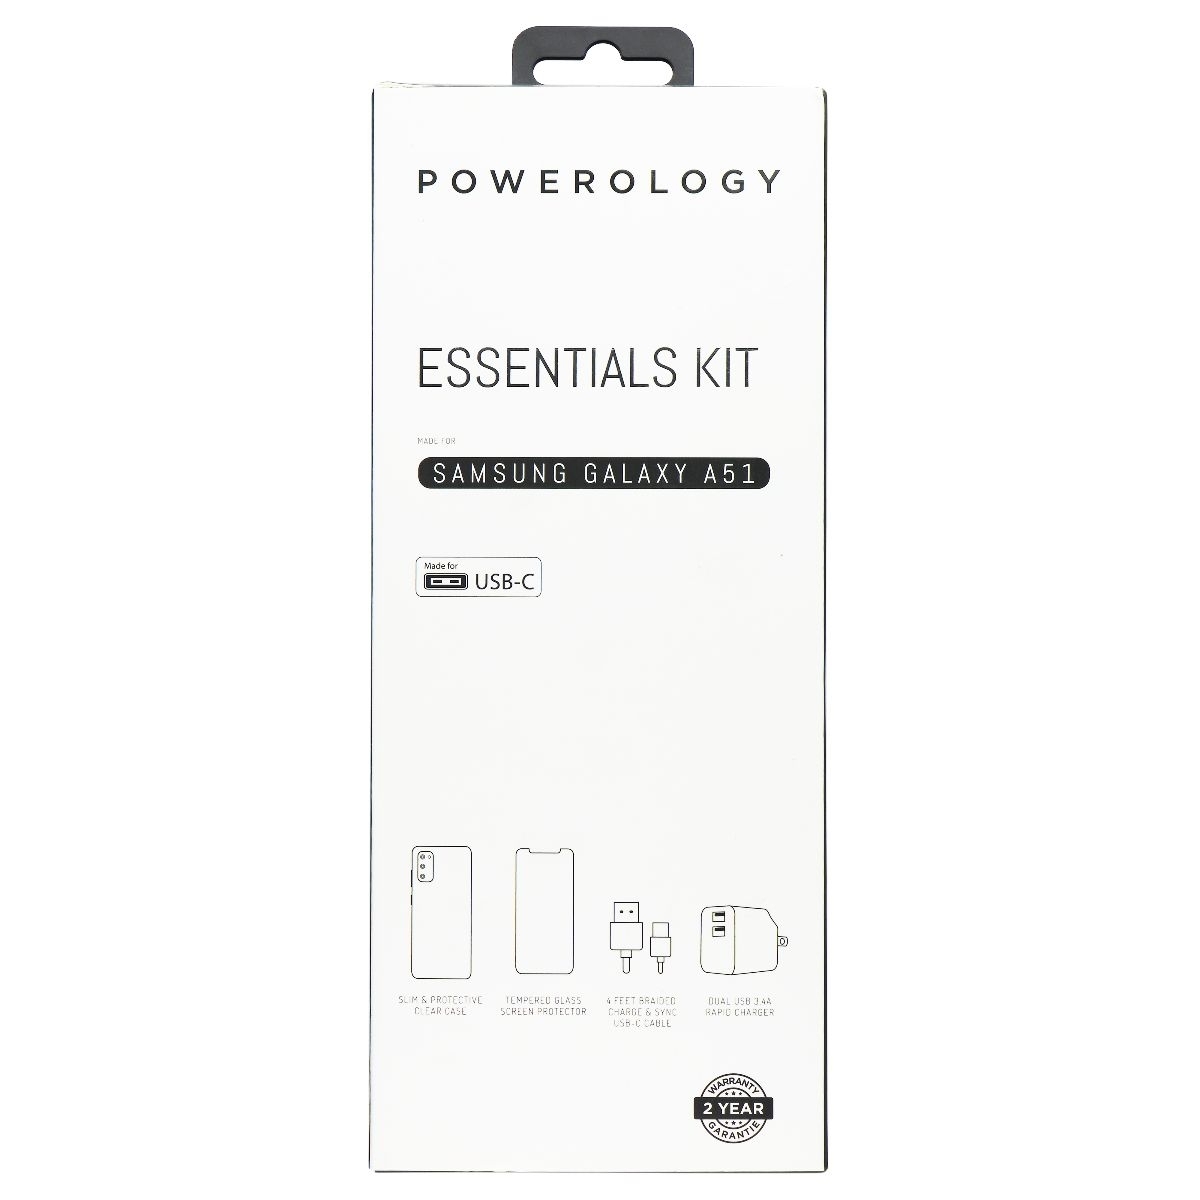 Powerology Essentials Kit W/ Case And Power For Samsung Galaxy A51 - Clear (Refurbished)